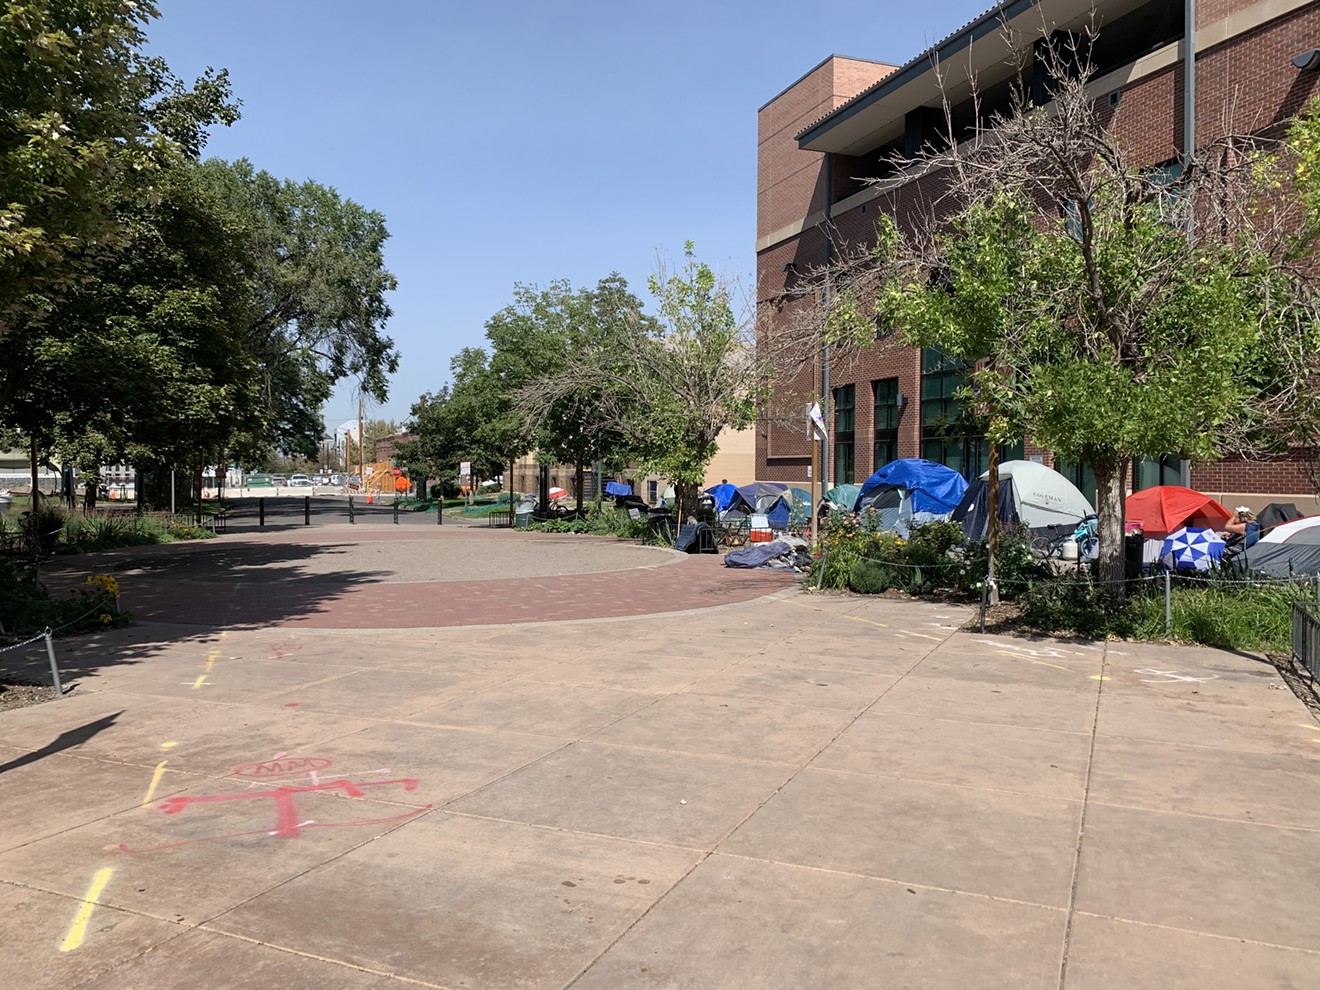 The plaza between Sonny Lawson Park and the Blair-Caldwell African American Research Library.